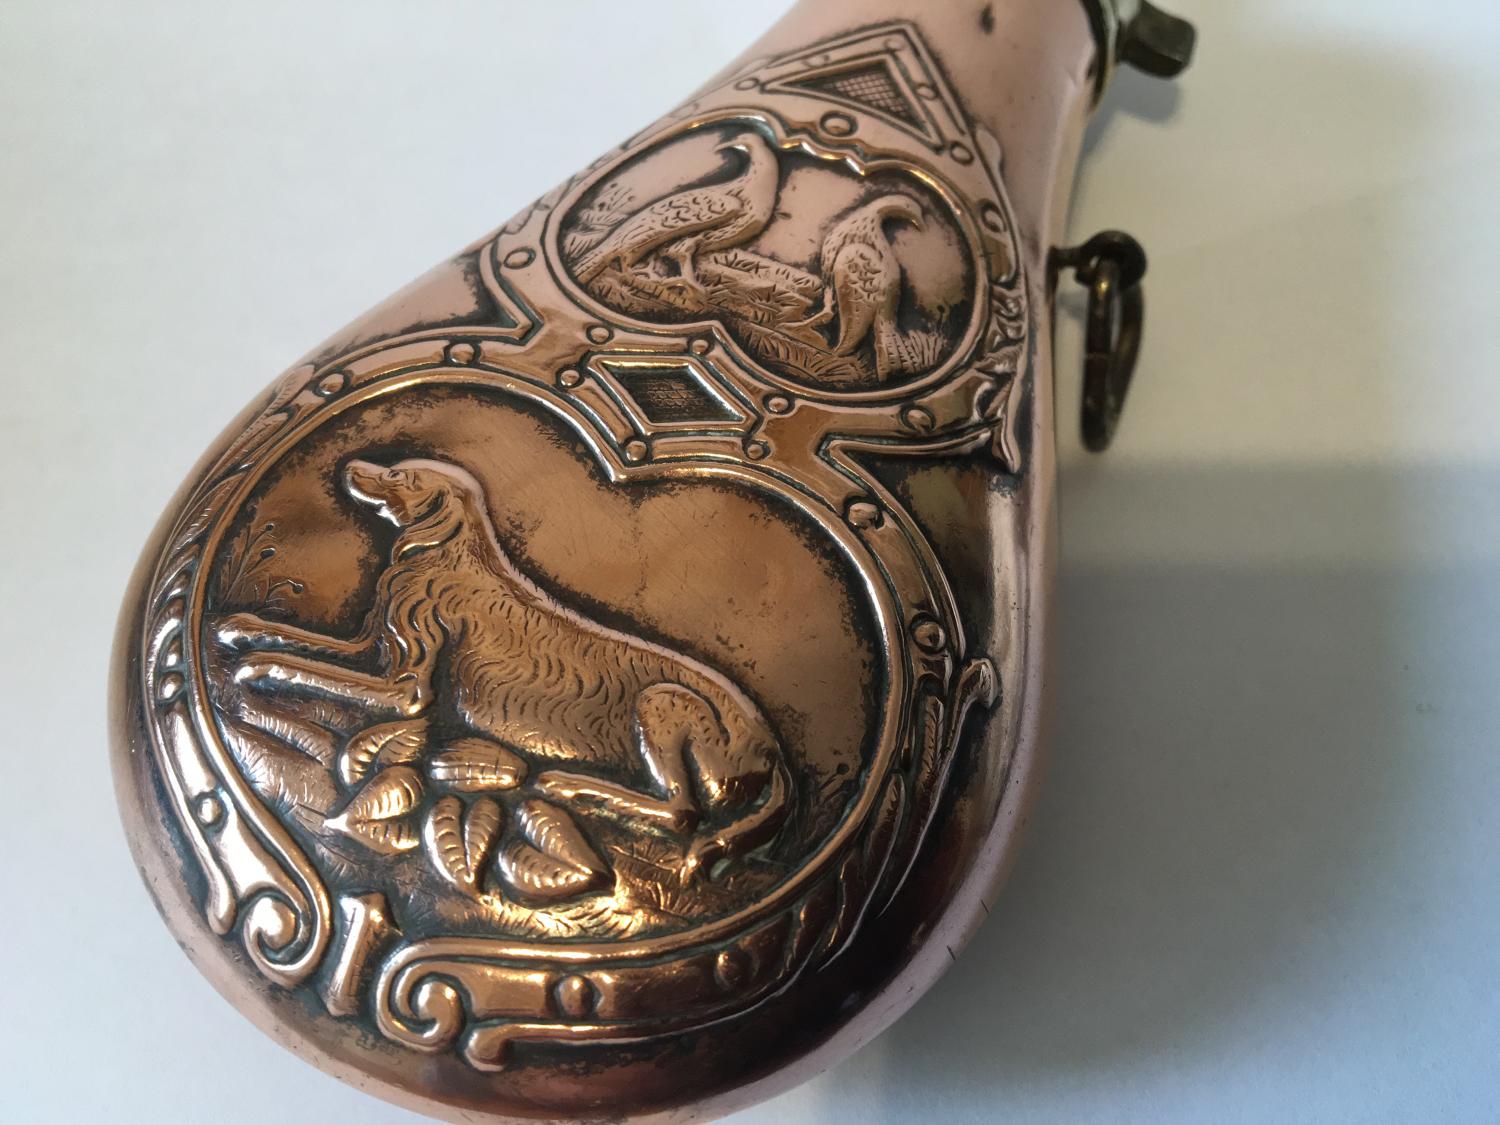 Copper Powder Flask with Hunting dog and bird